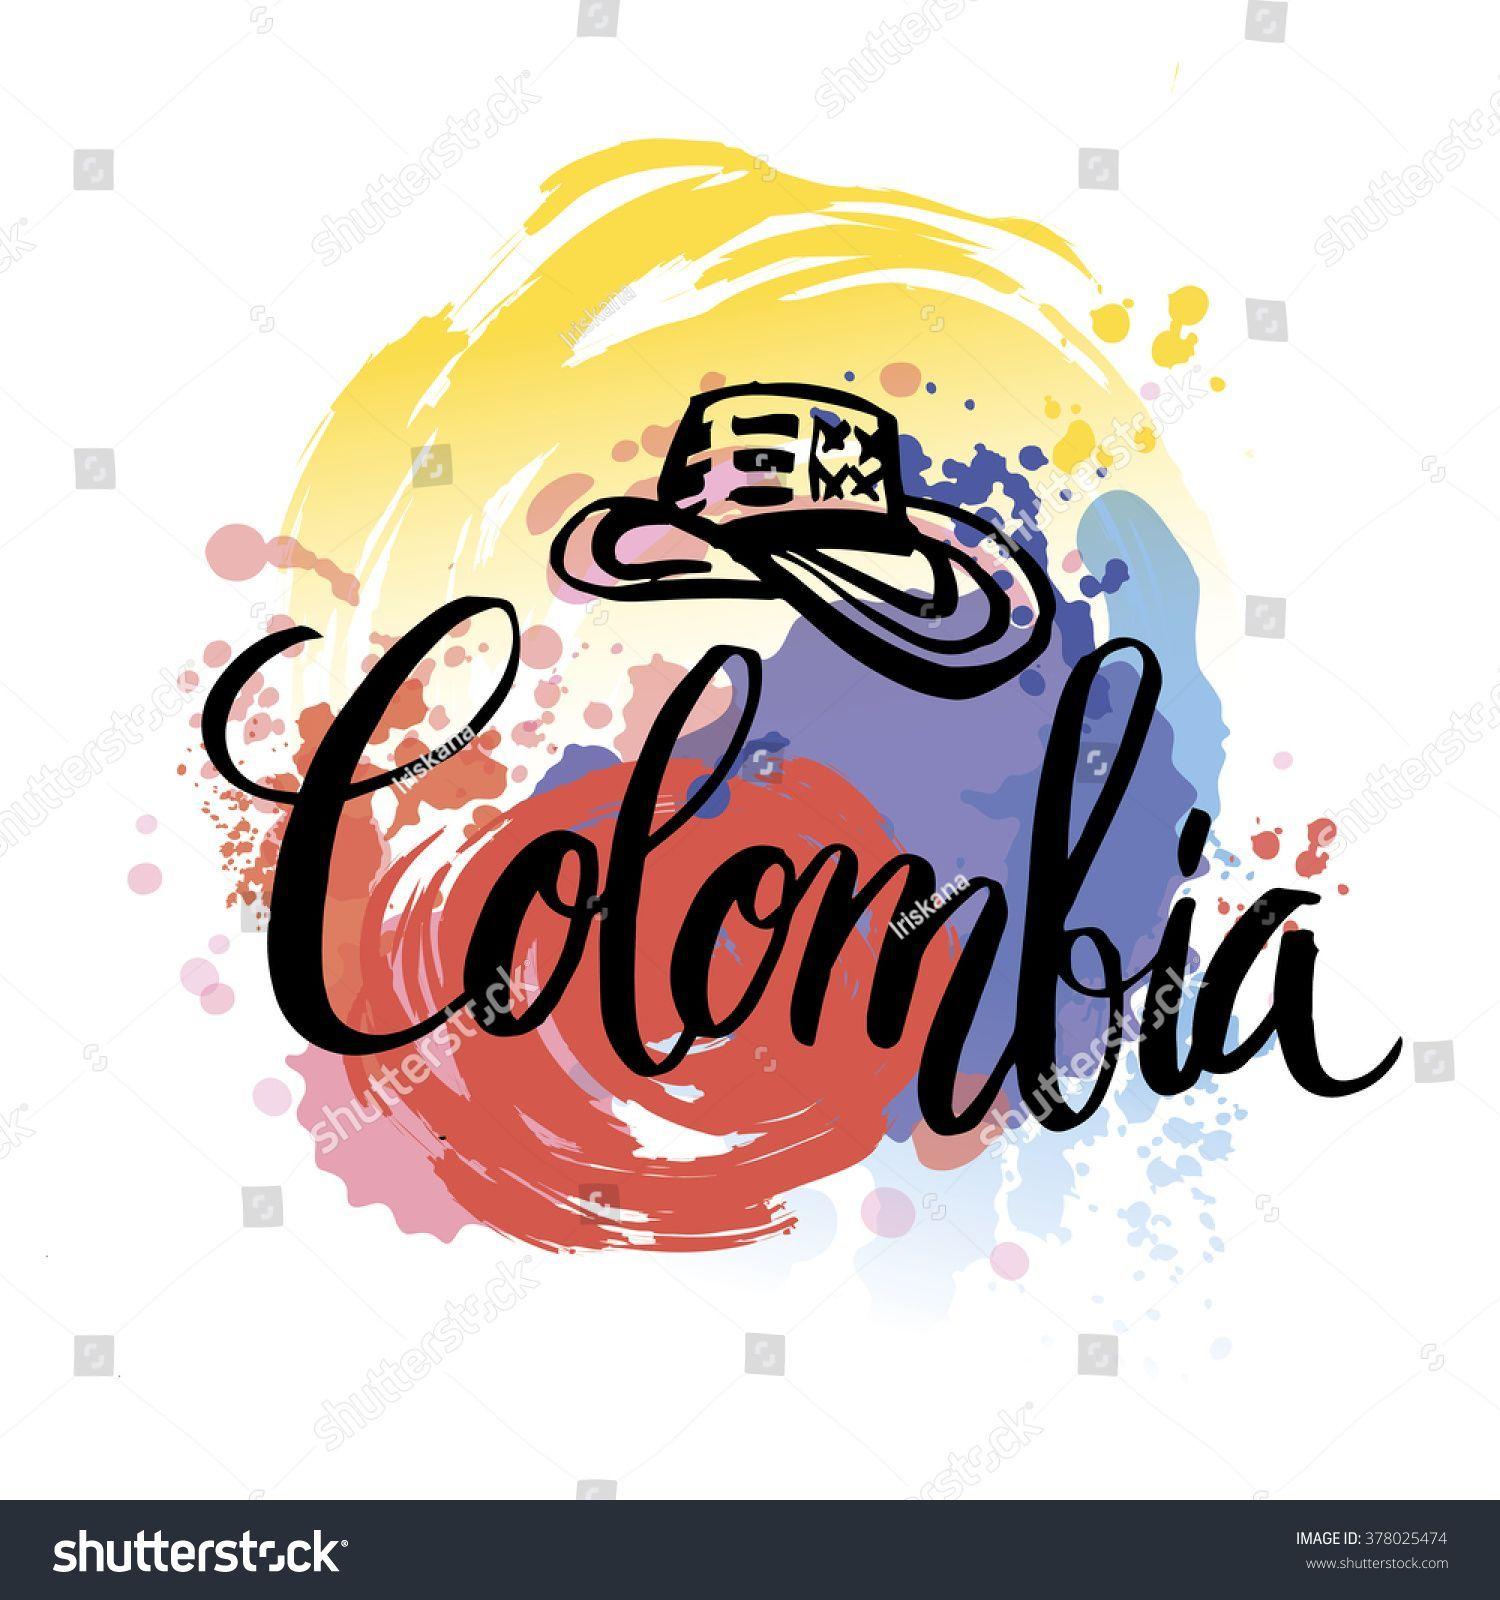 Colombia Logo - Hand lettering logo with watercolor elements. Vector illustration ...